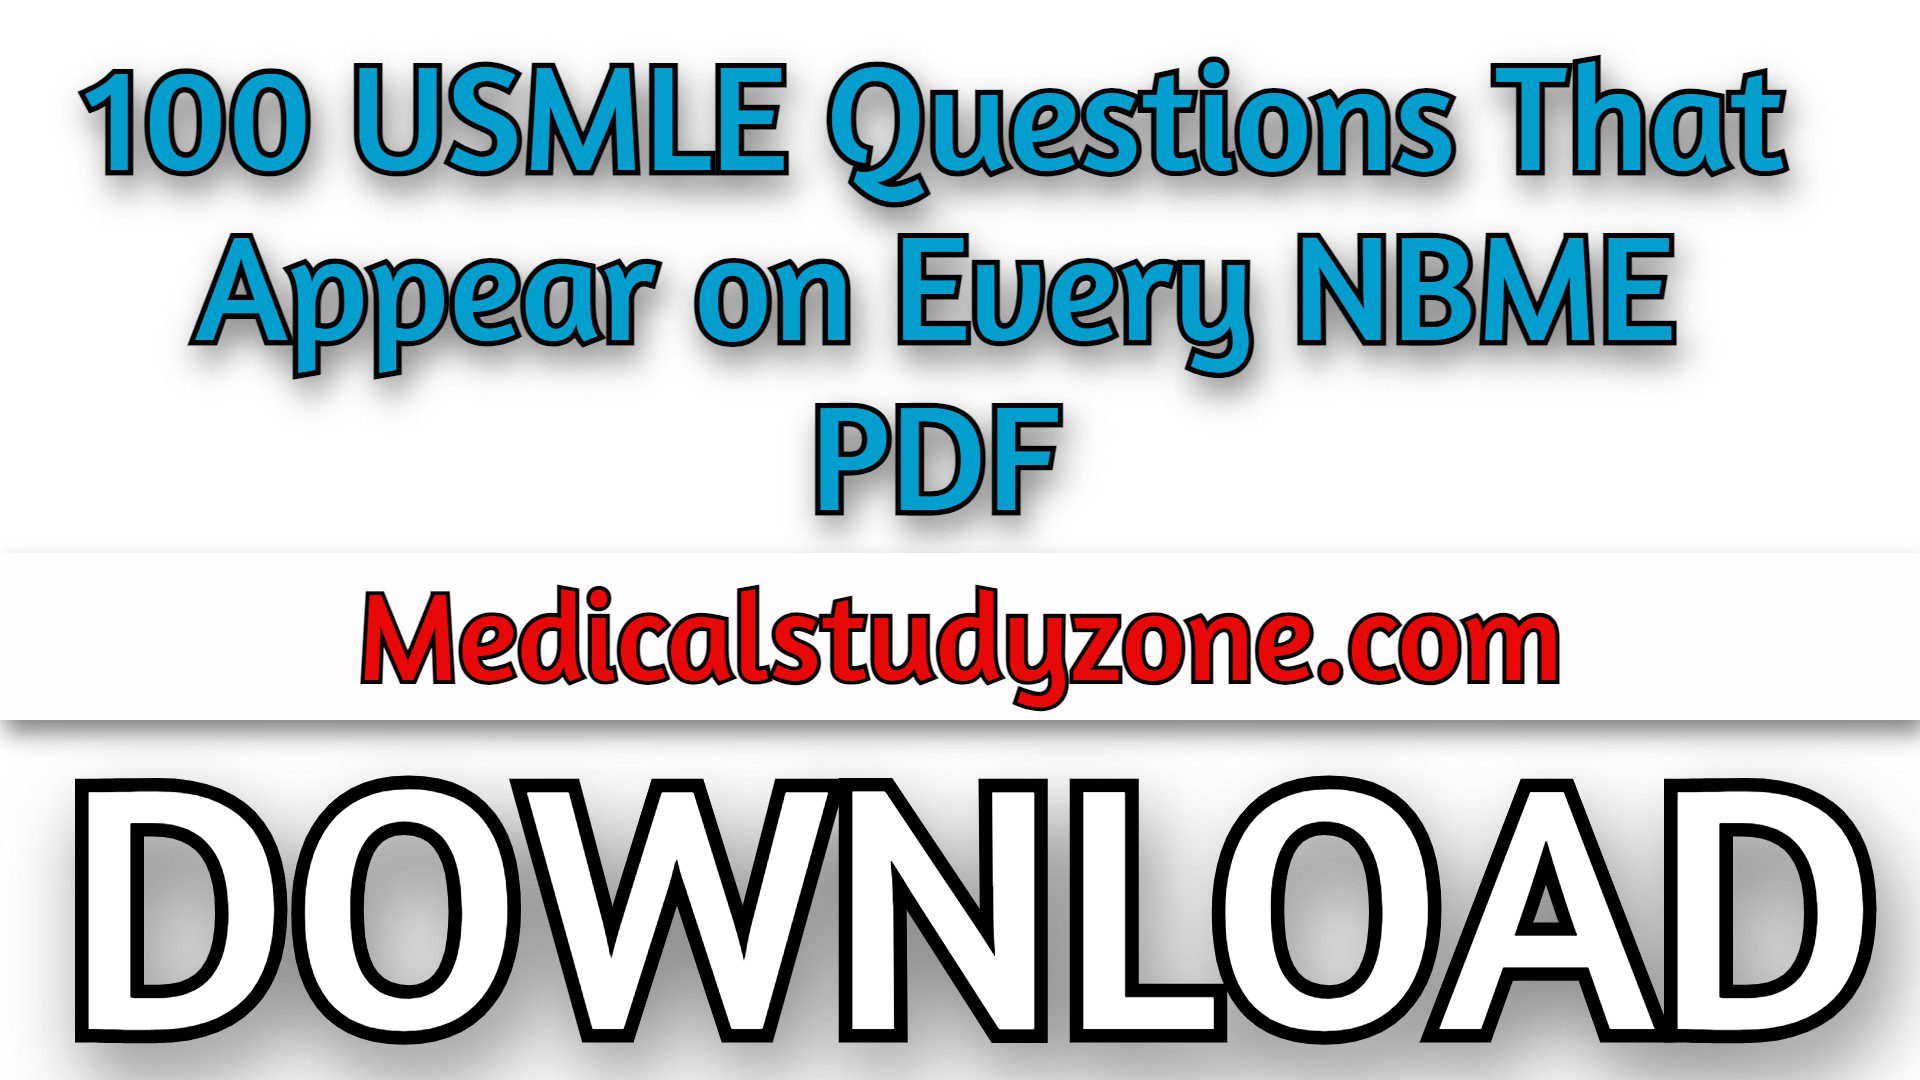 Download 100 USMLE Questions That Appear on Every NBME PDF Free